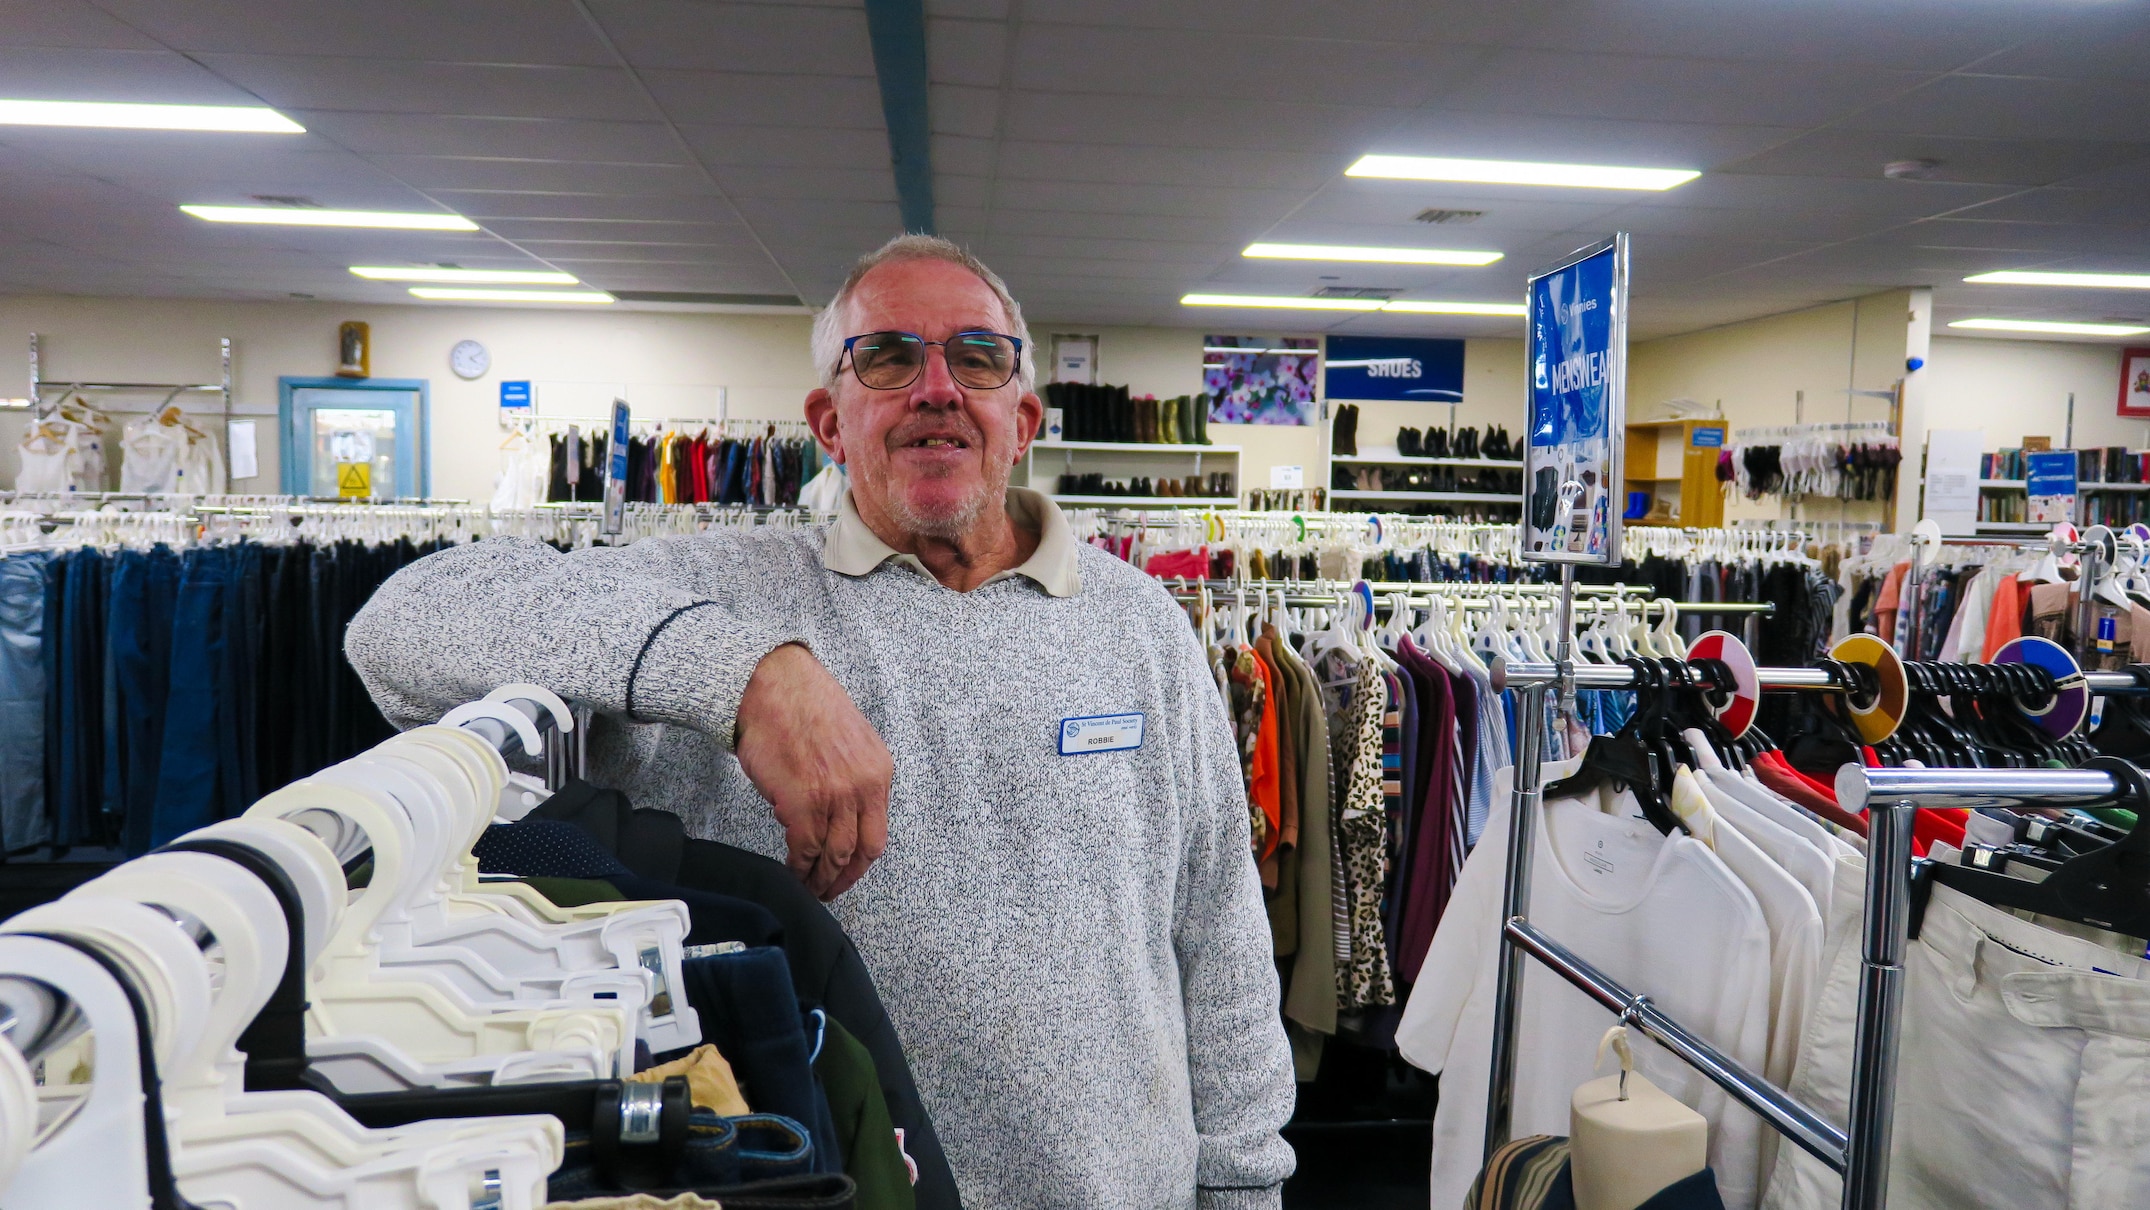 op shops report major spike in customers amid cost of living pressure, drive to sustainability